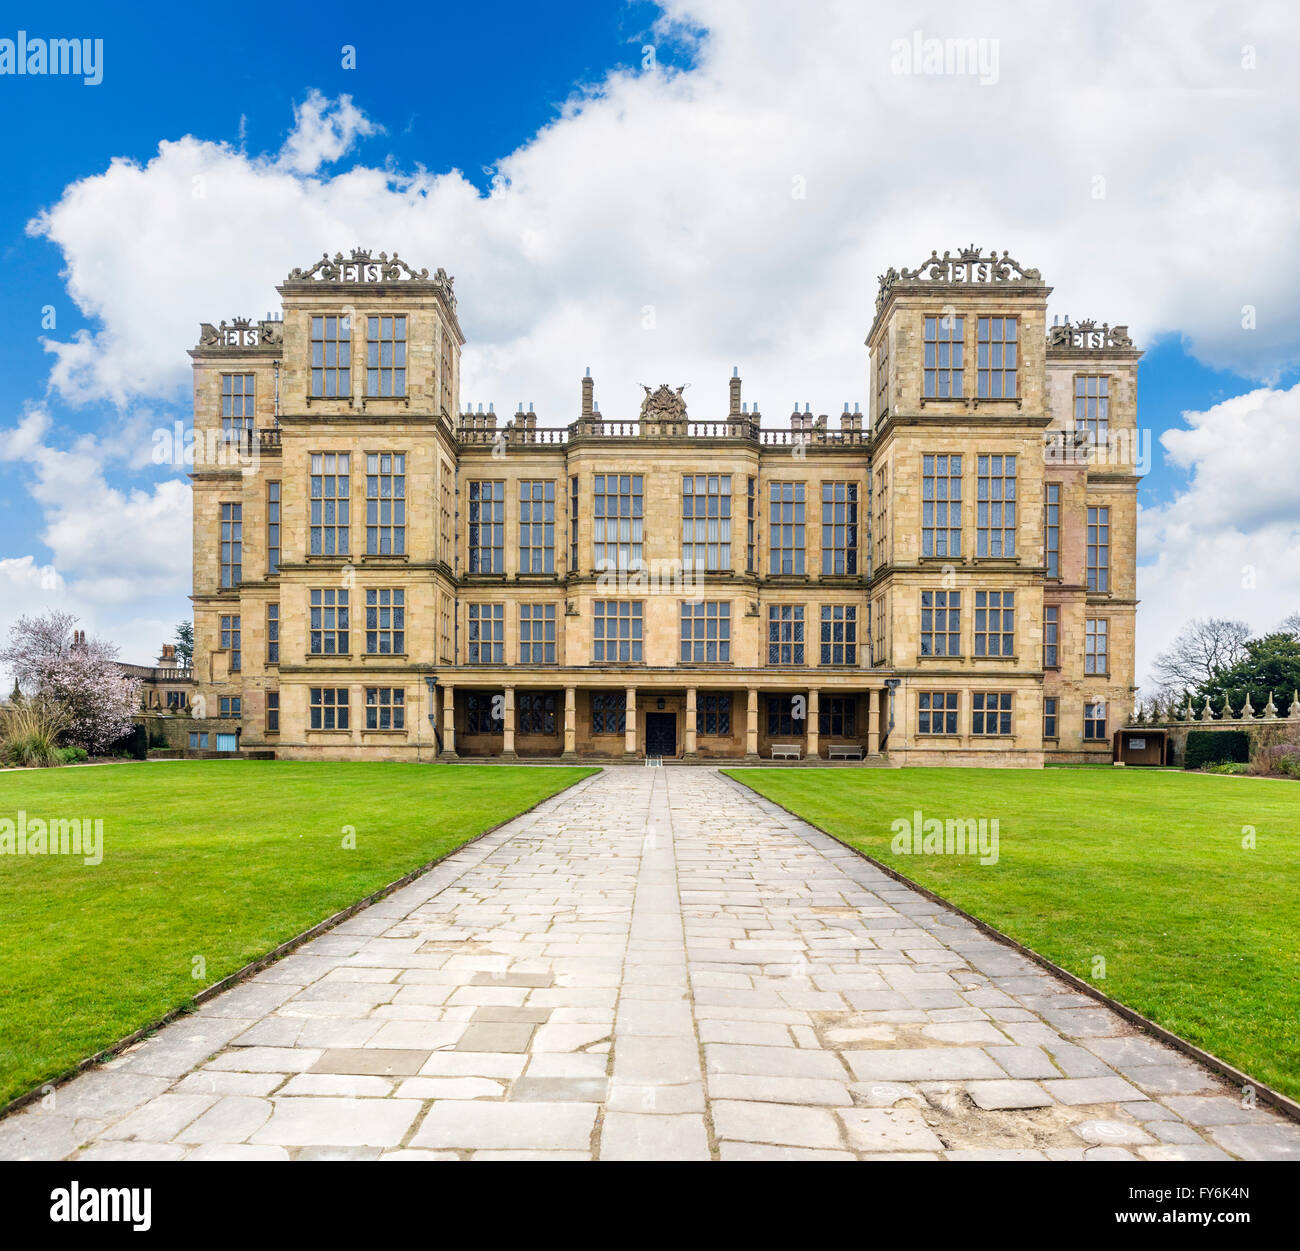 Hardwick Hall, an Elizabethan country house and home of Bess of Hardwick, near Chesterfield, Derbyshire, England, UK Stock Photo